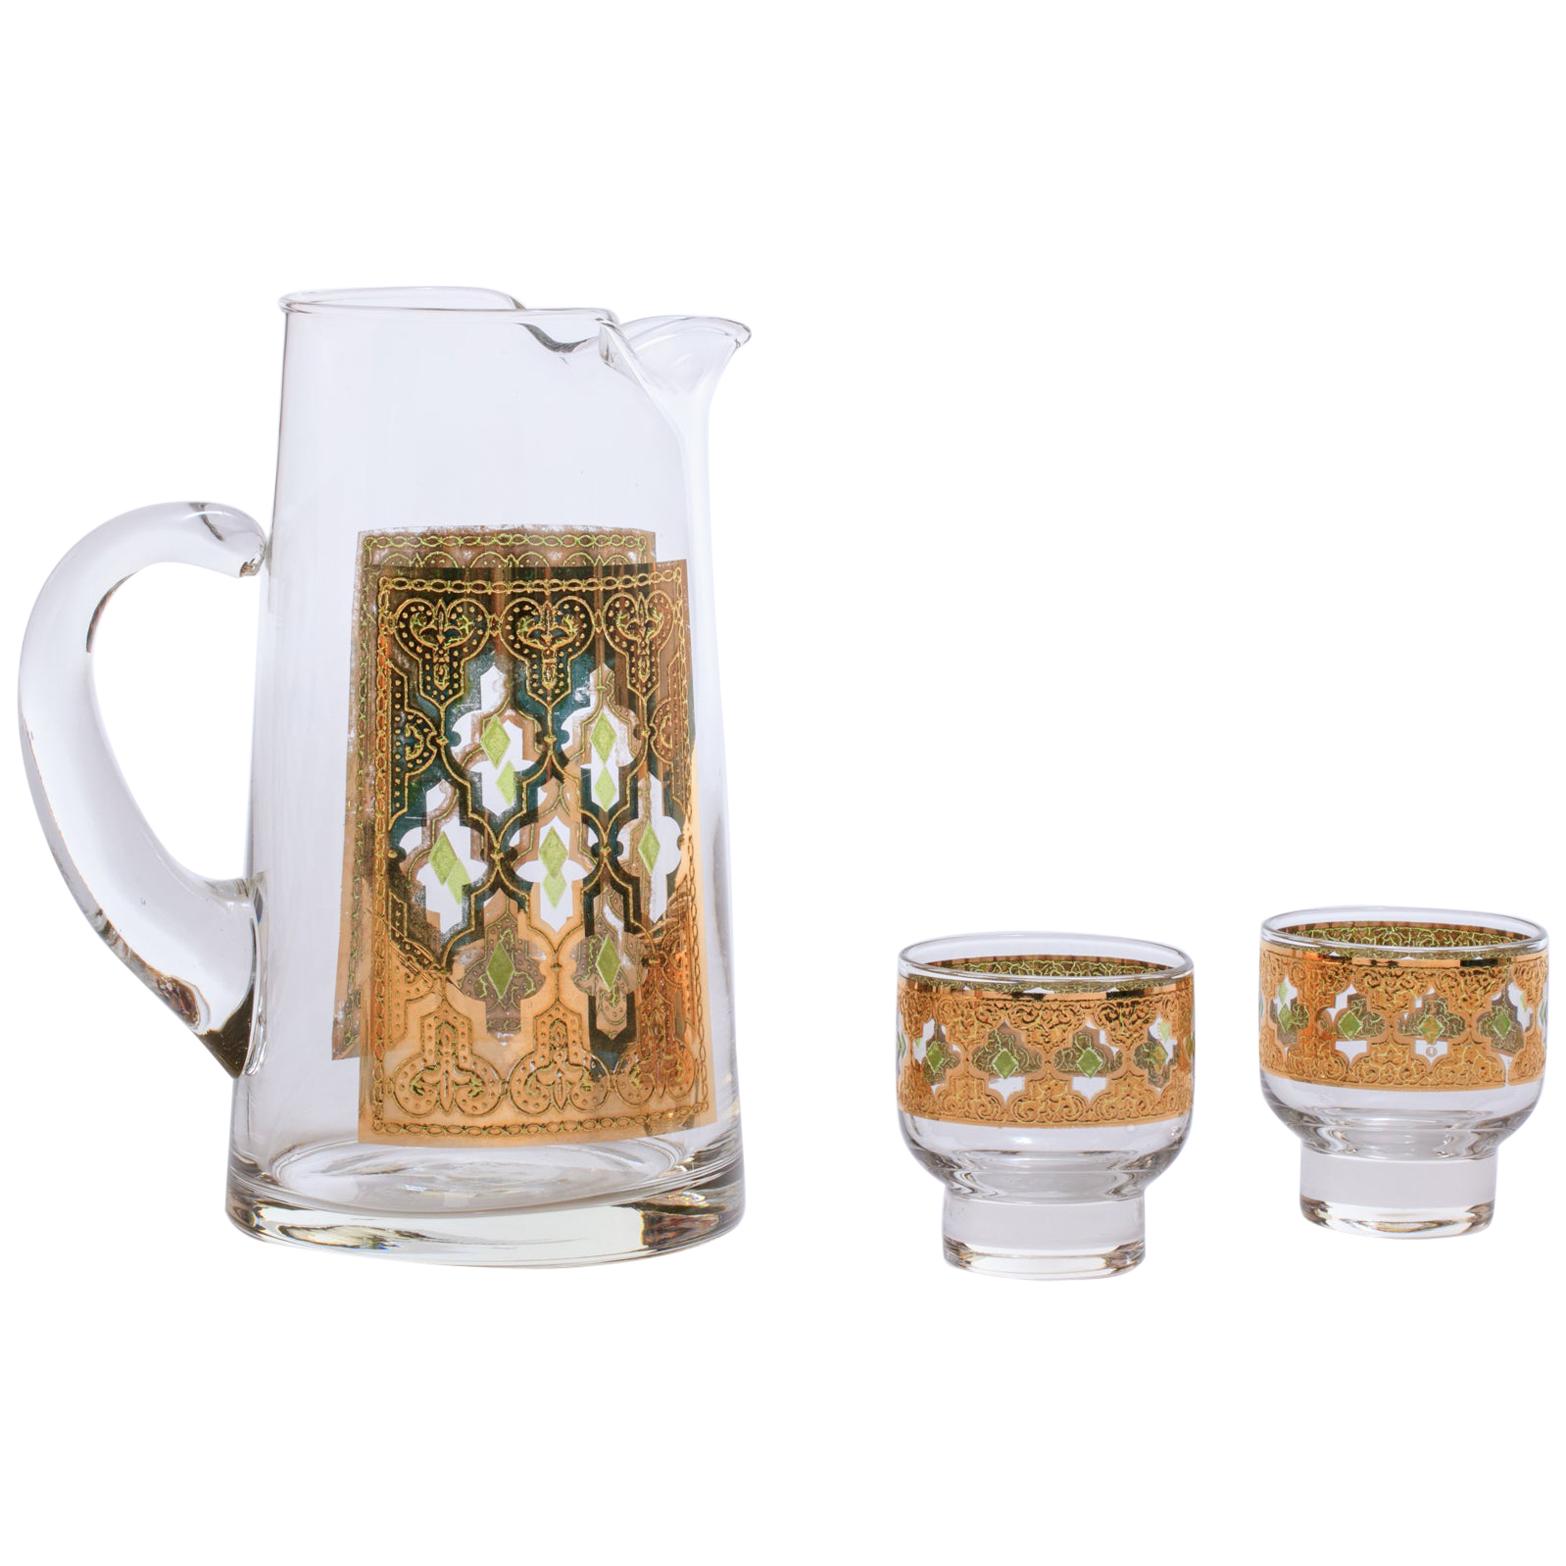 22-Karat Gold Moroccan Themed Vintage Beverage or Water Pitcher with Glasses